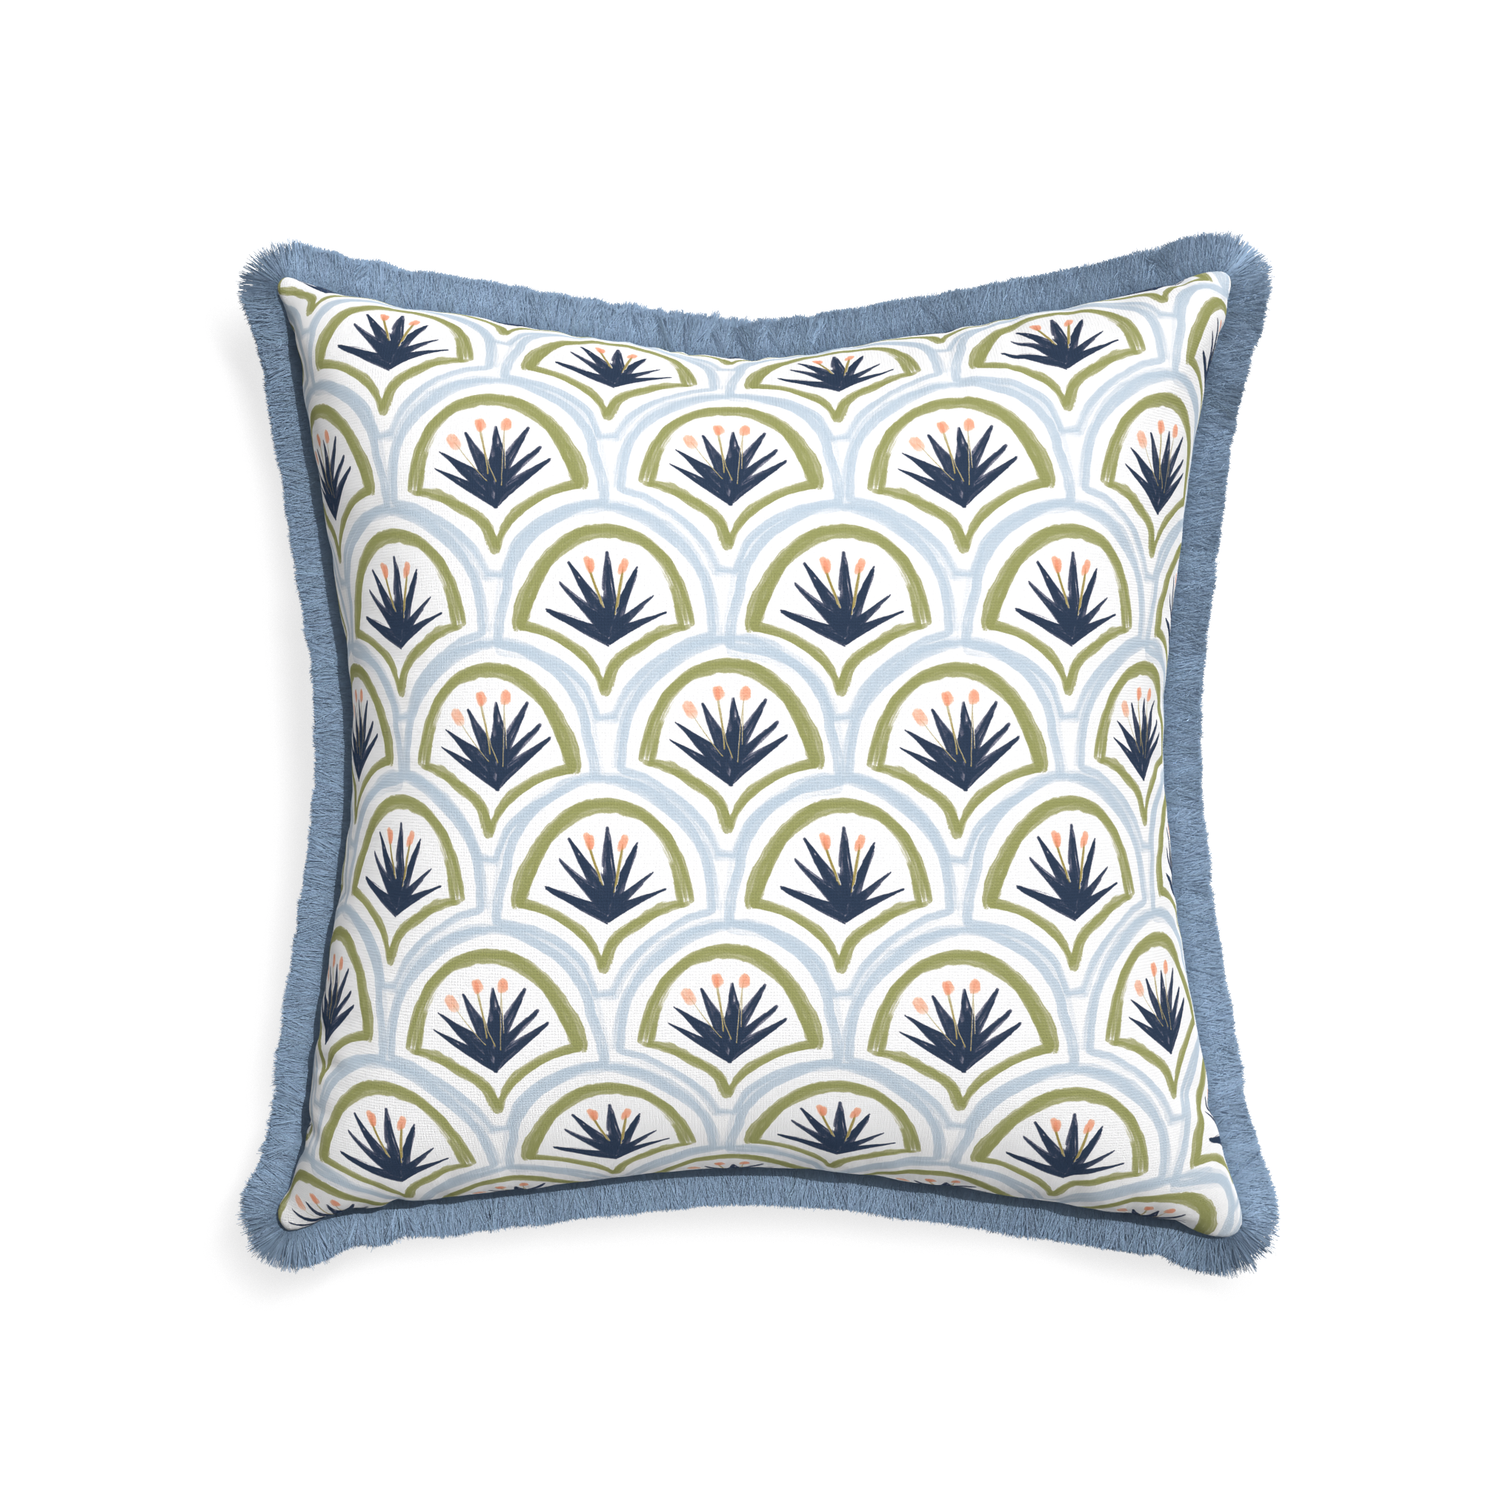 22-square thatcher midnight custom art deco palm patternpillow with sky fringe on white background